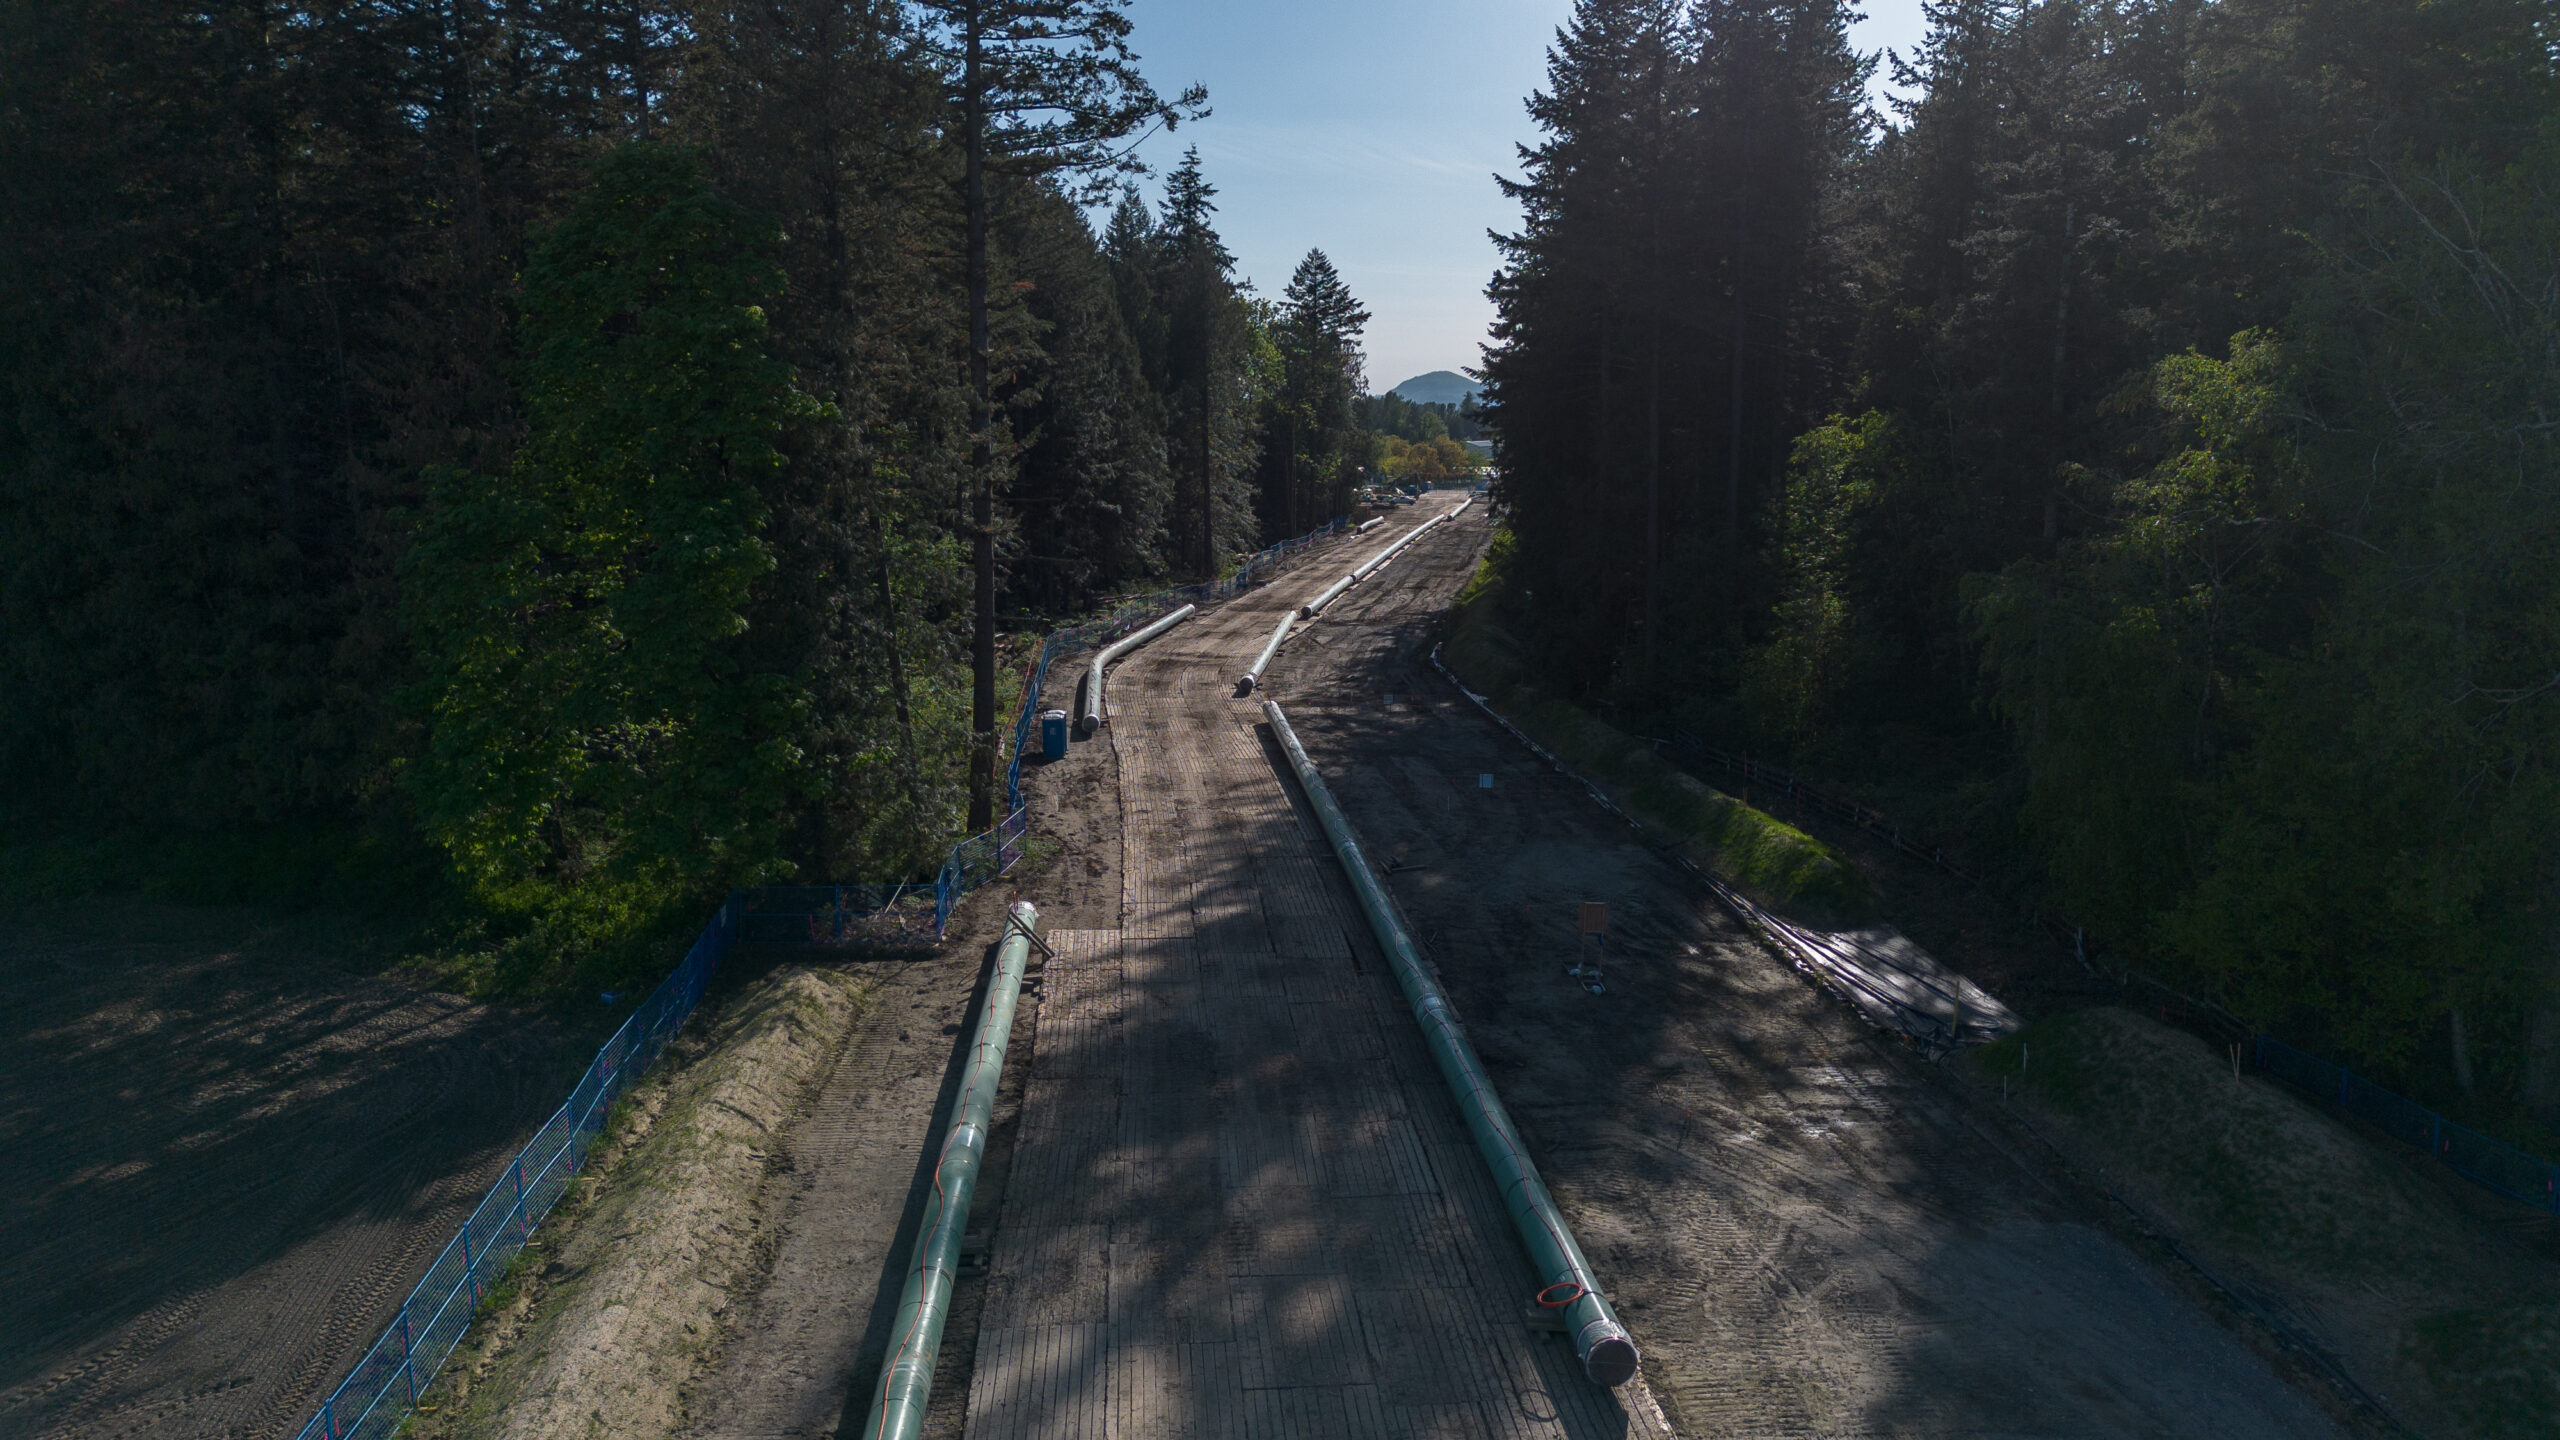 Pipeline segments through a path in the forest.